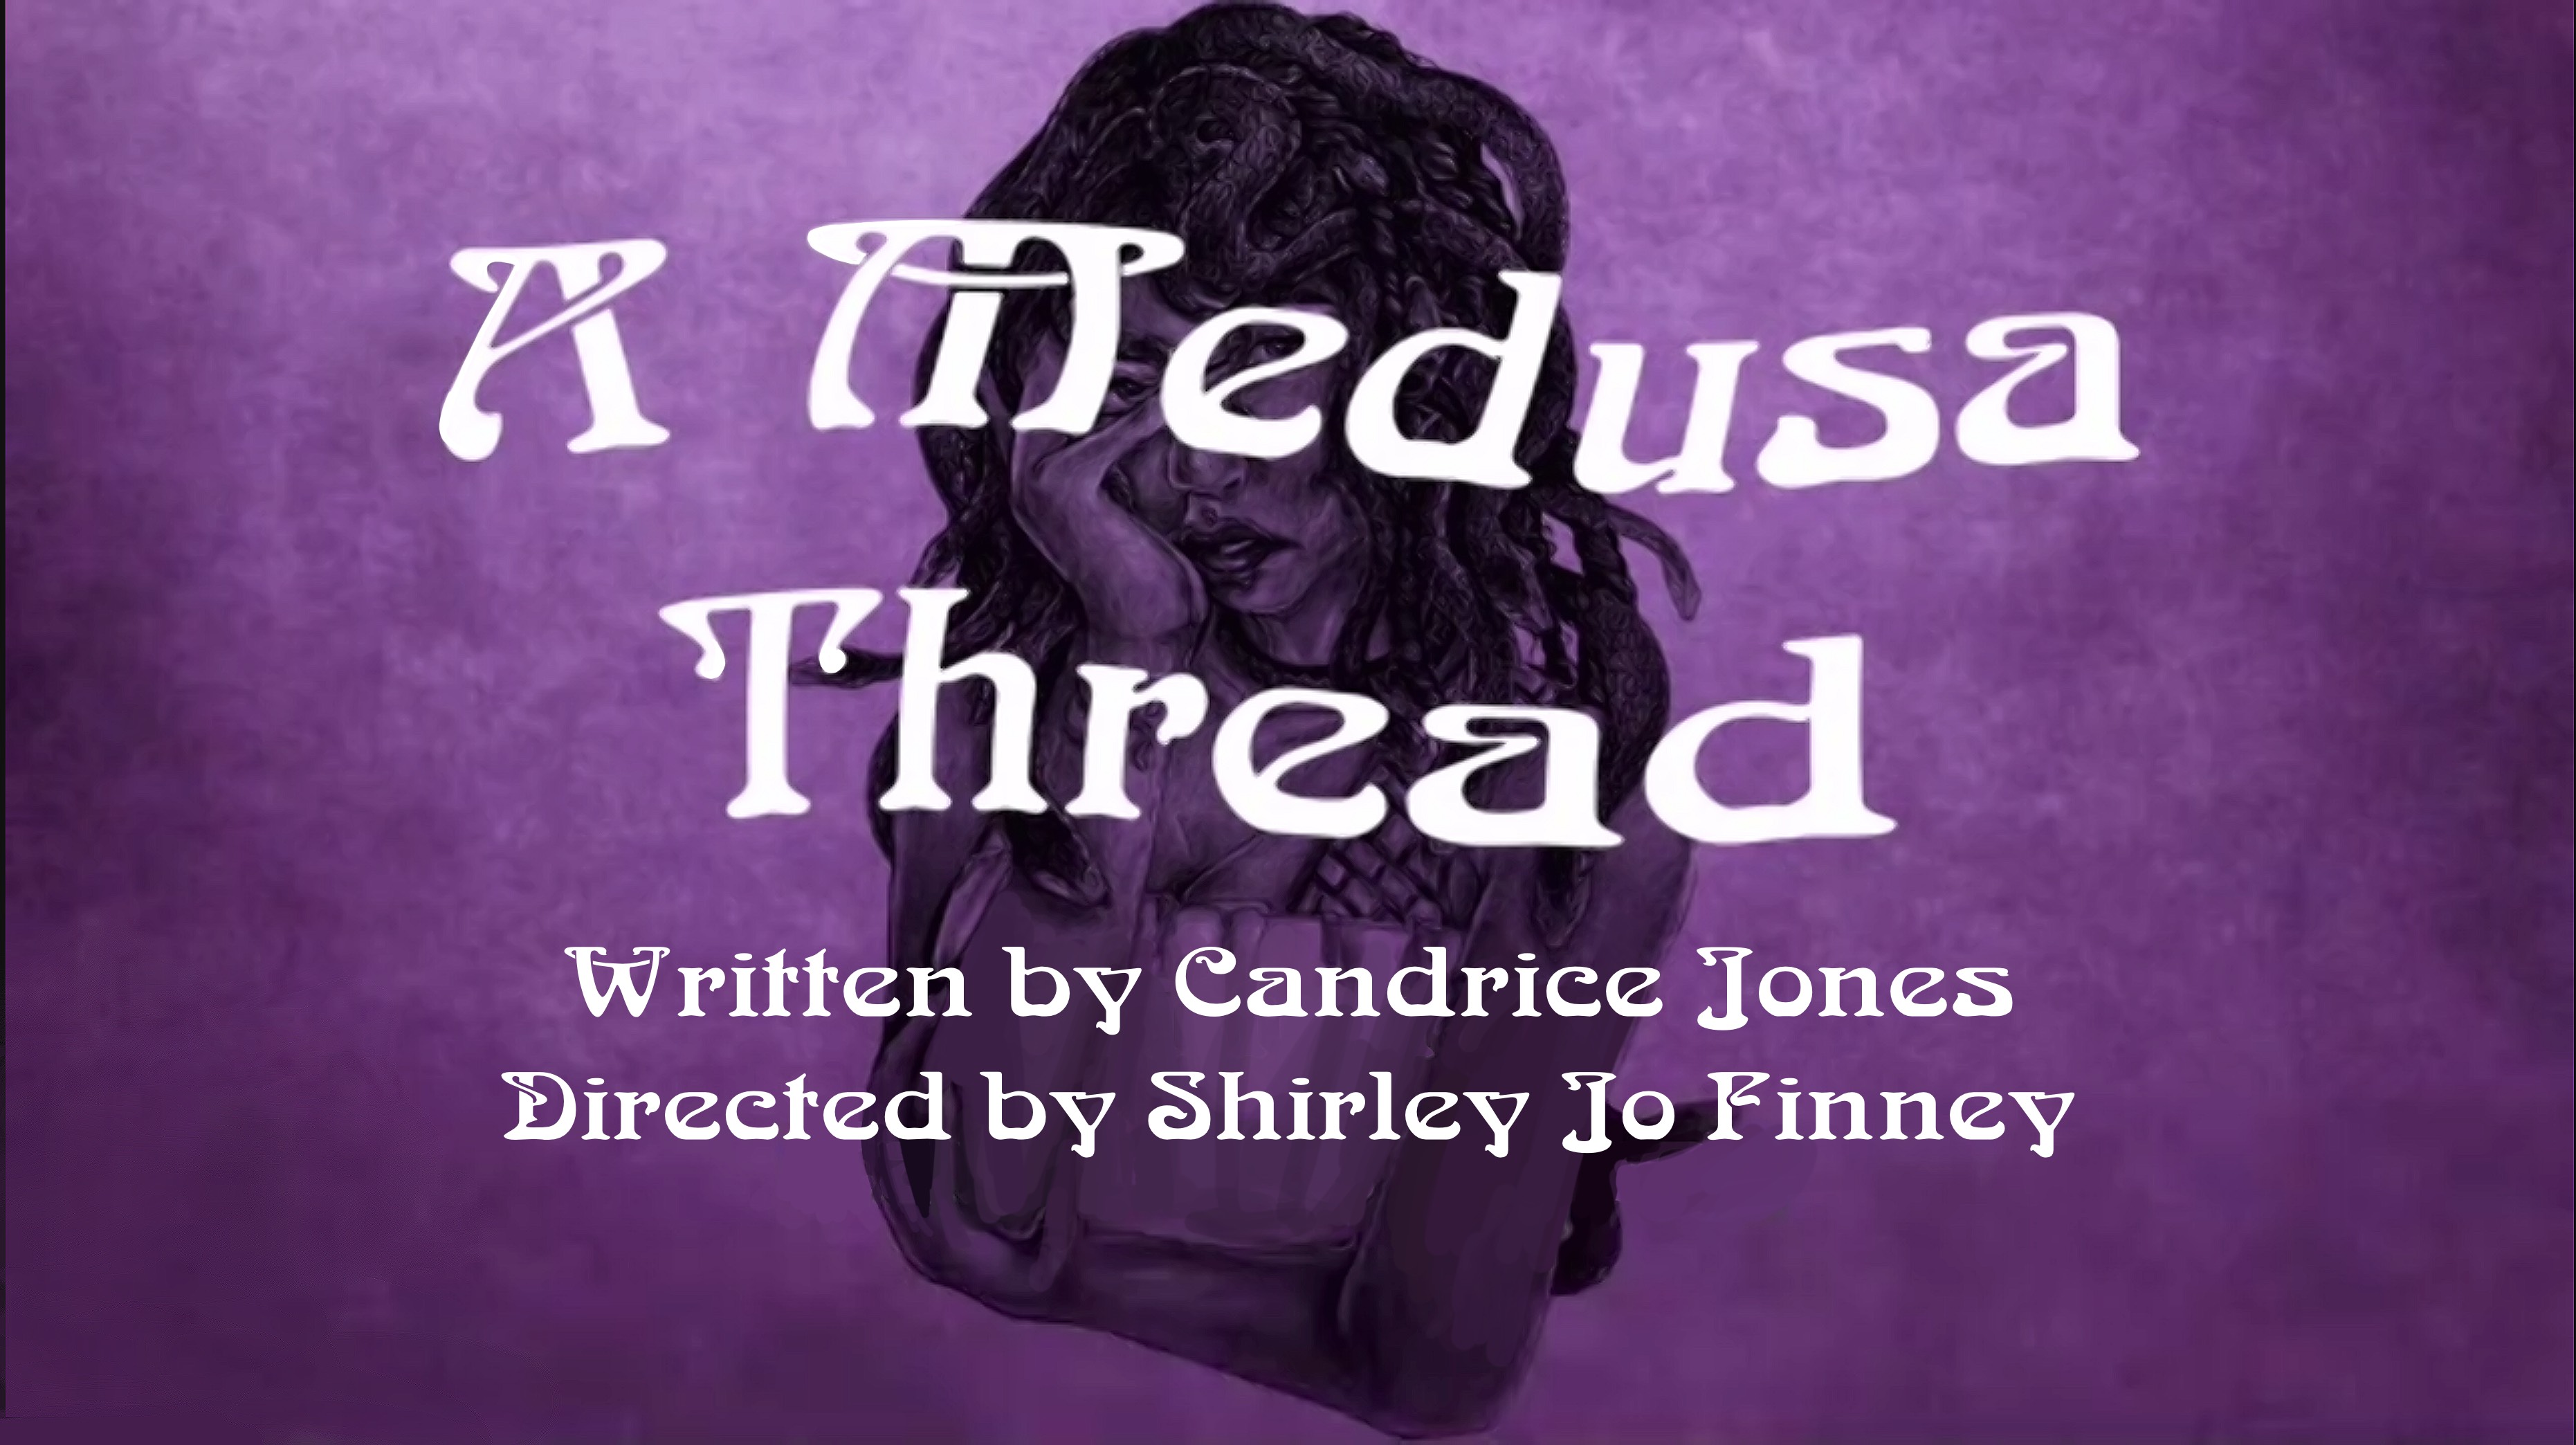 A Medusa Thread title card - purple and black and cool looking